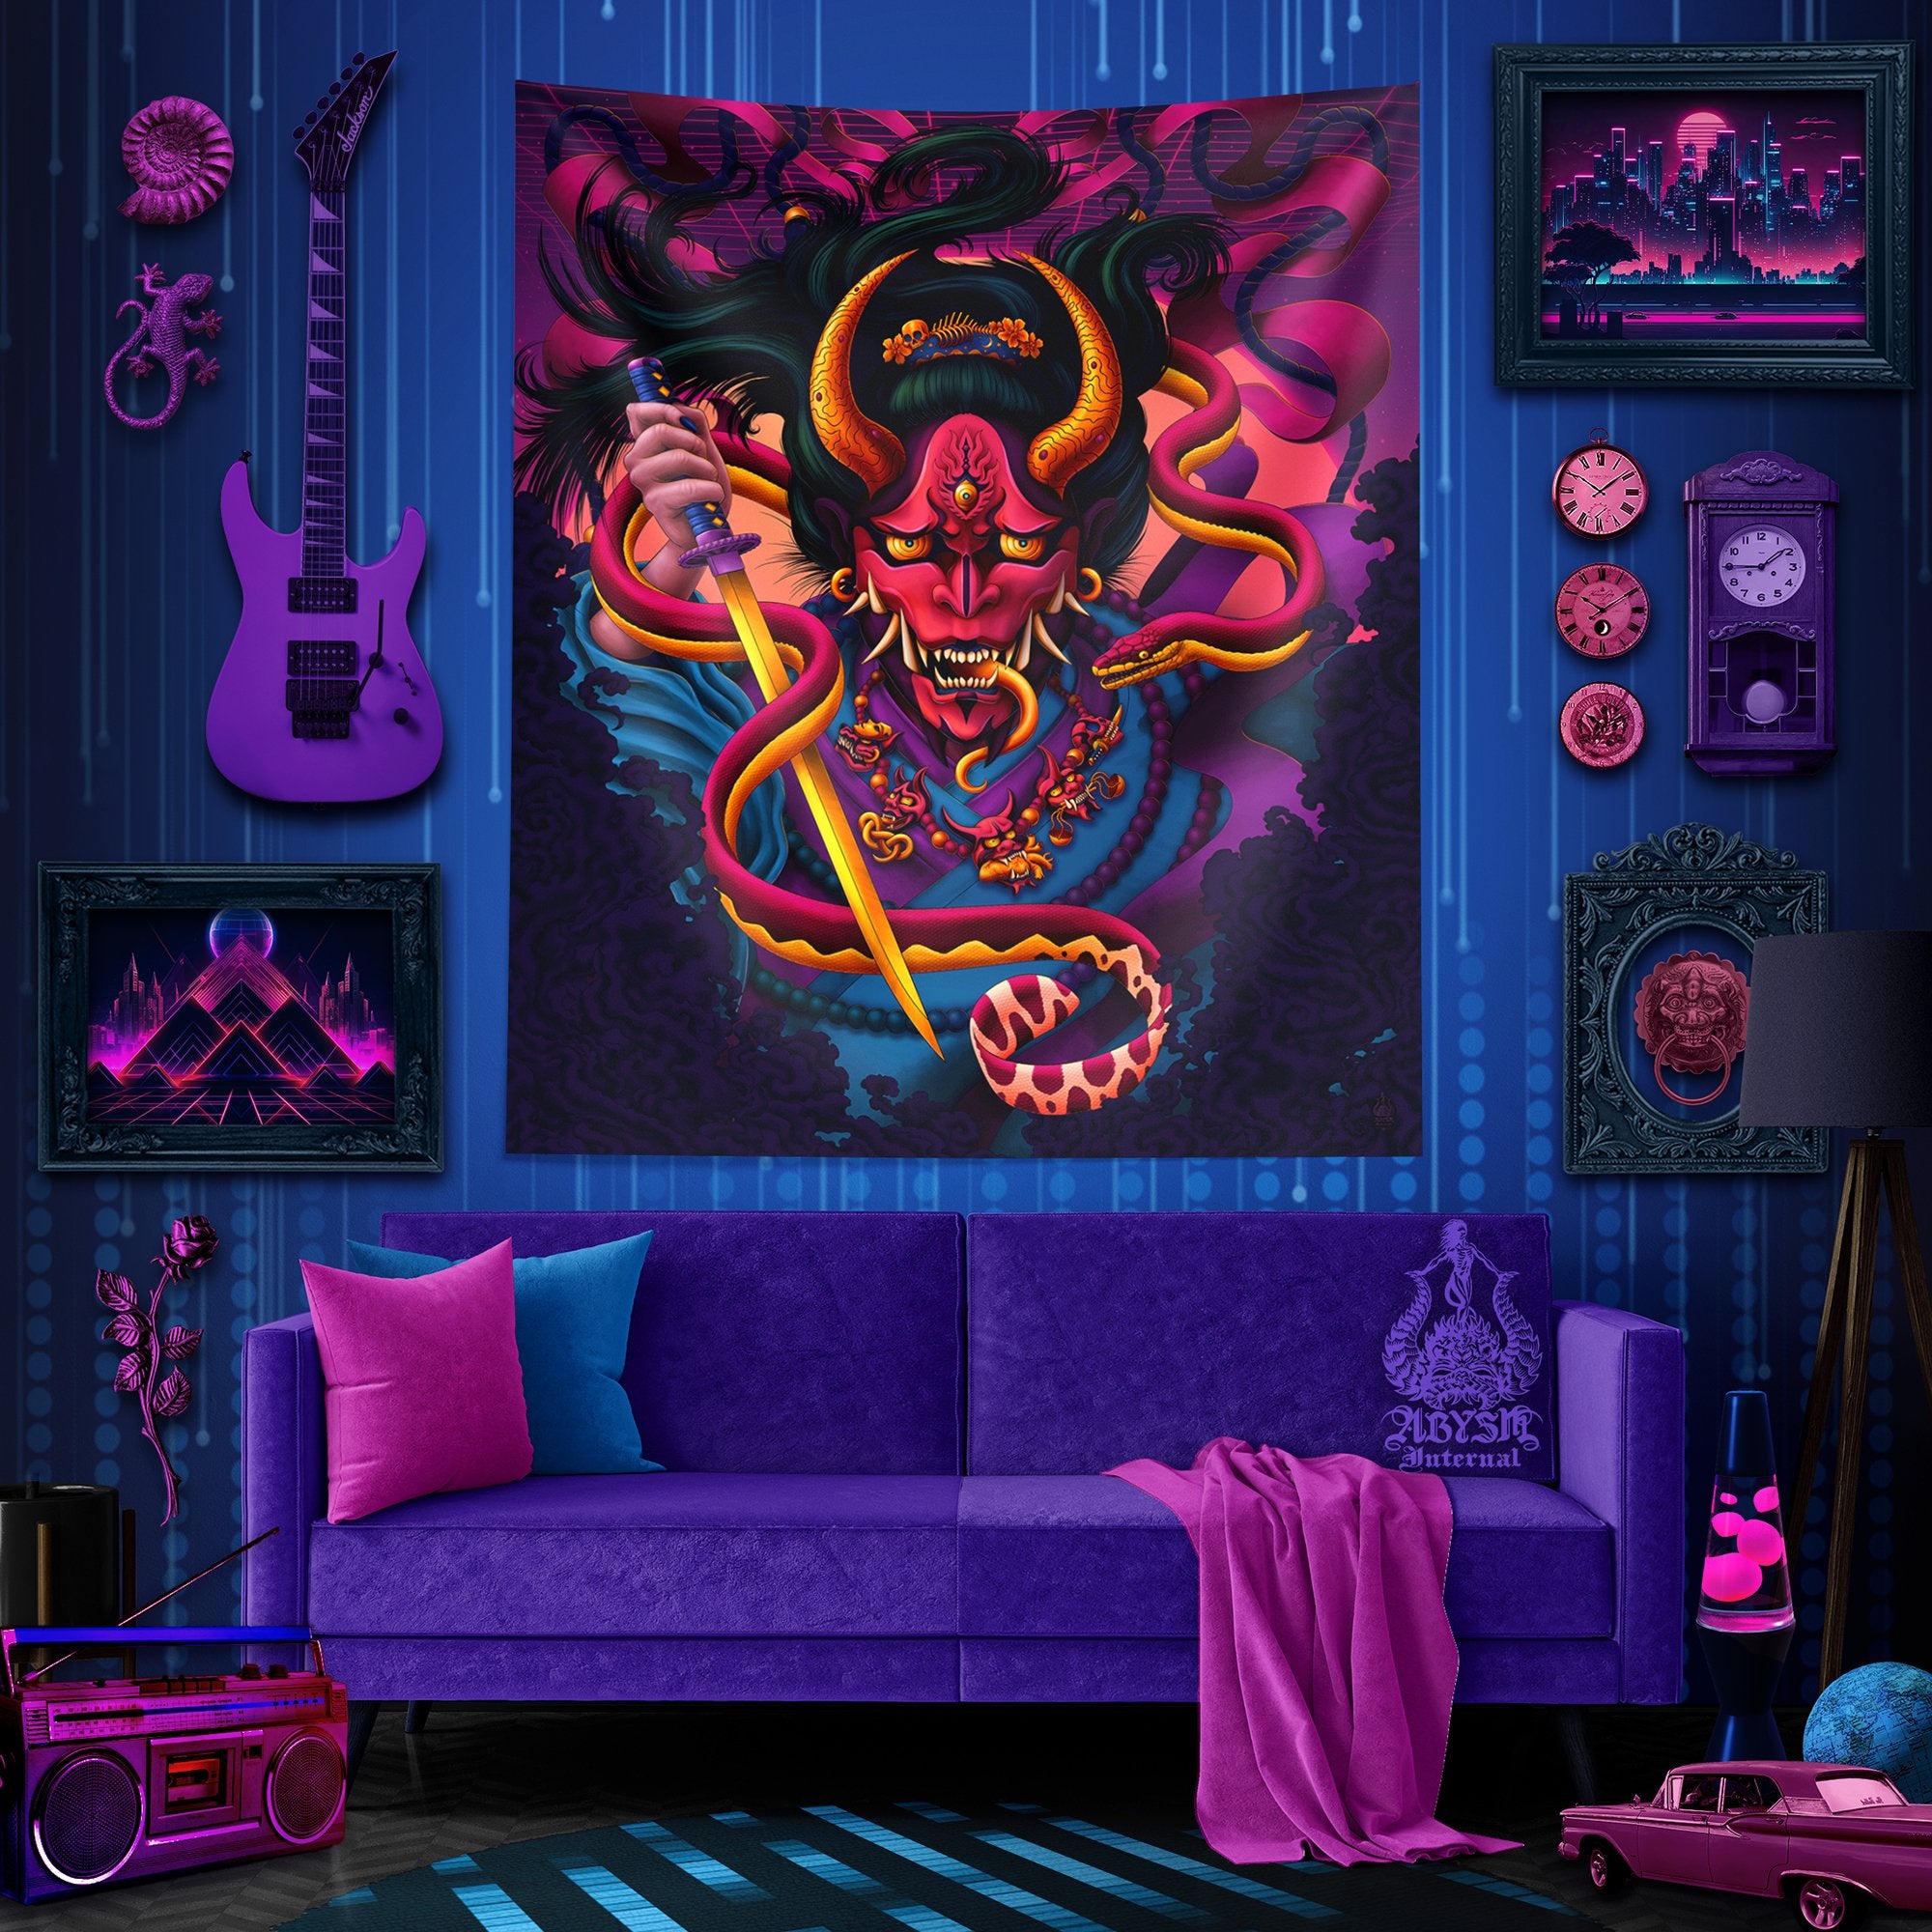 Psychedelic Demon Tapestry, Japanese Hannya and Snake Wall Hanging, Trippy Manga, Anime and Gamer Room Decor, Vertical Art Print - Vaporwave - Abysm Internal